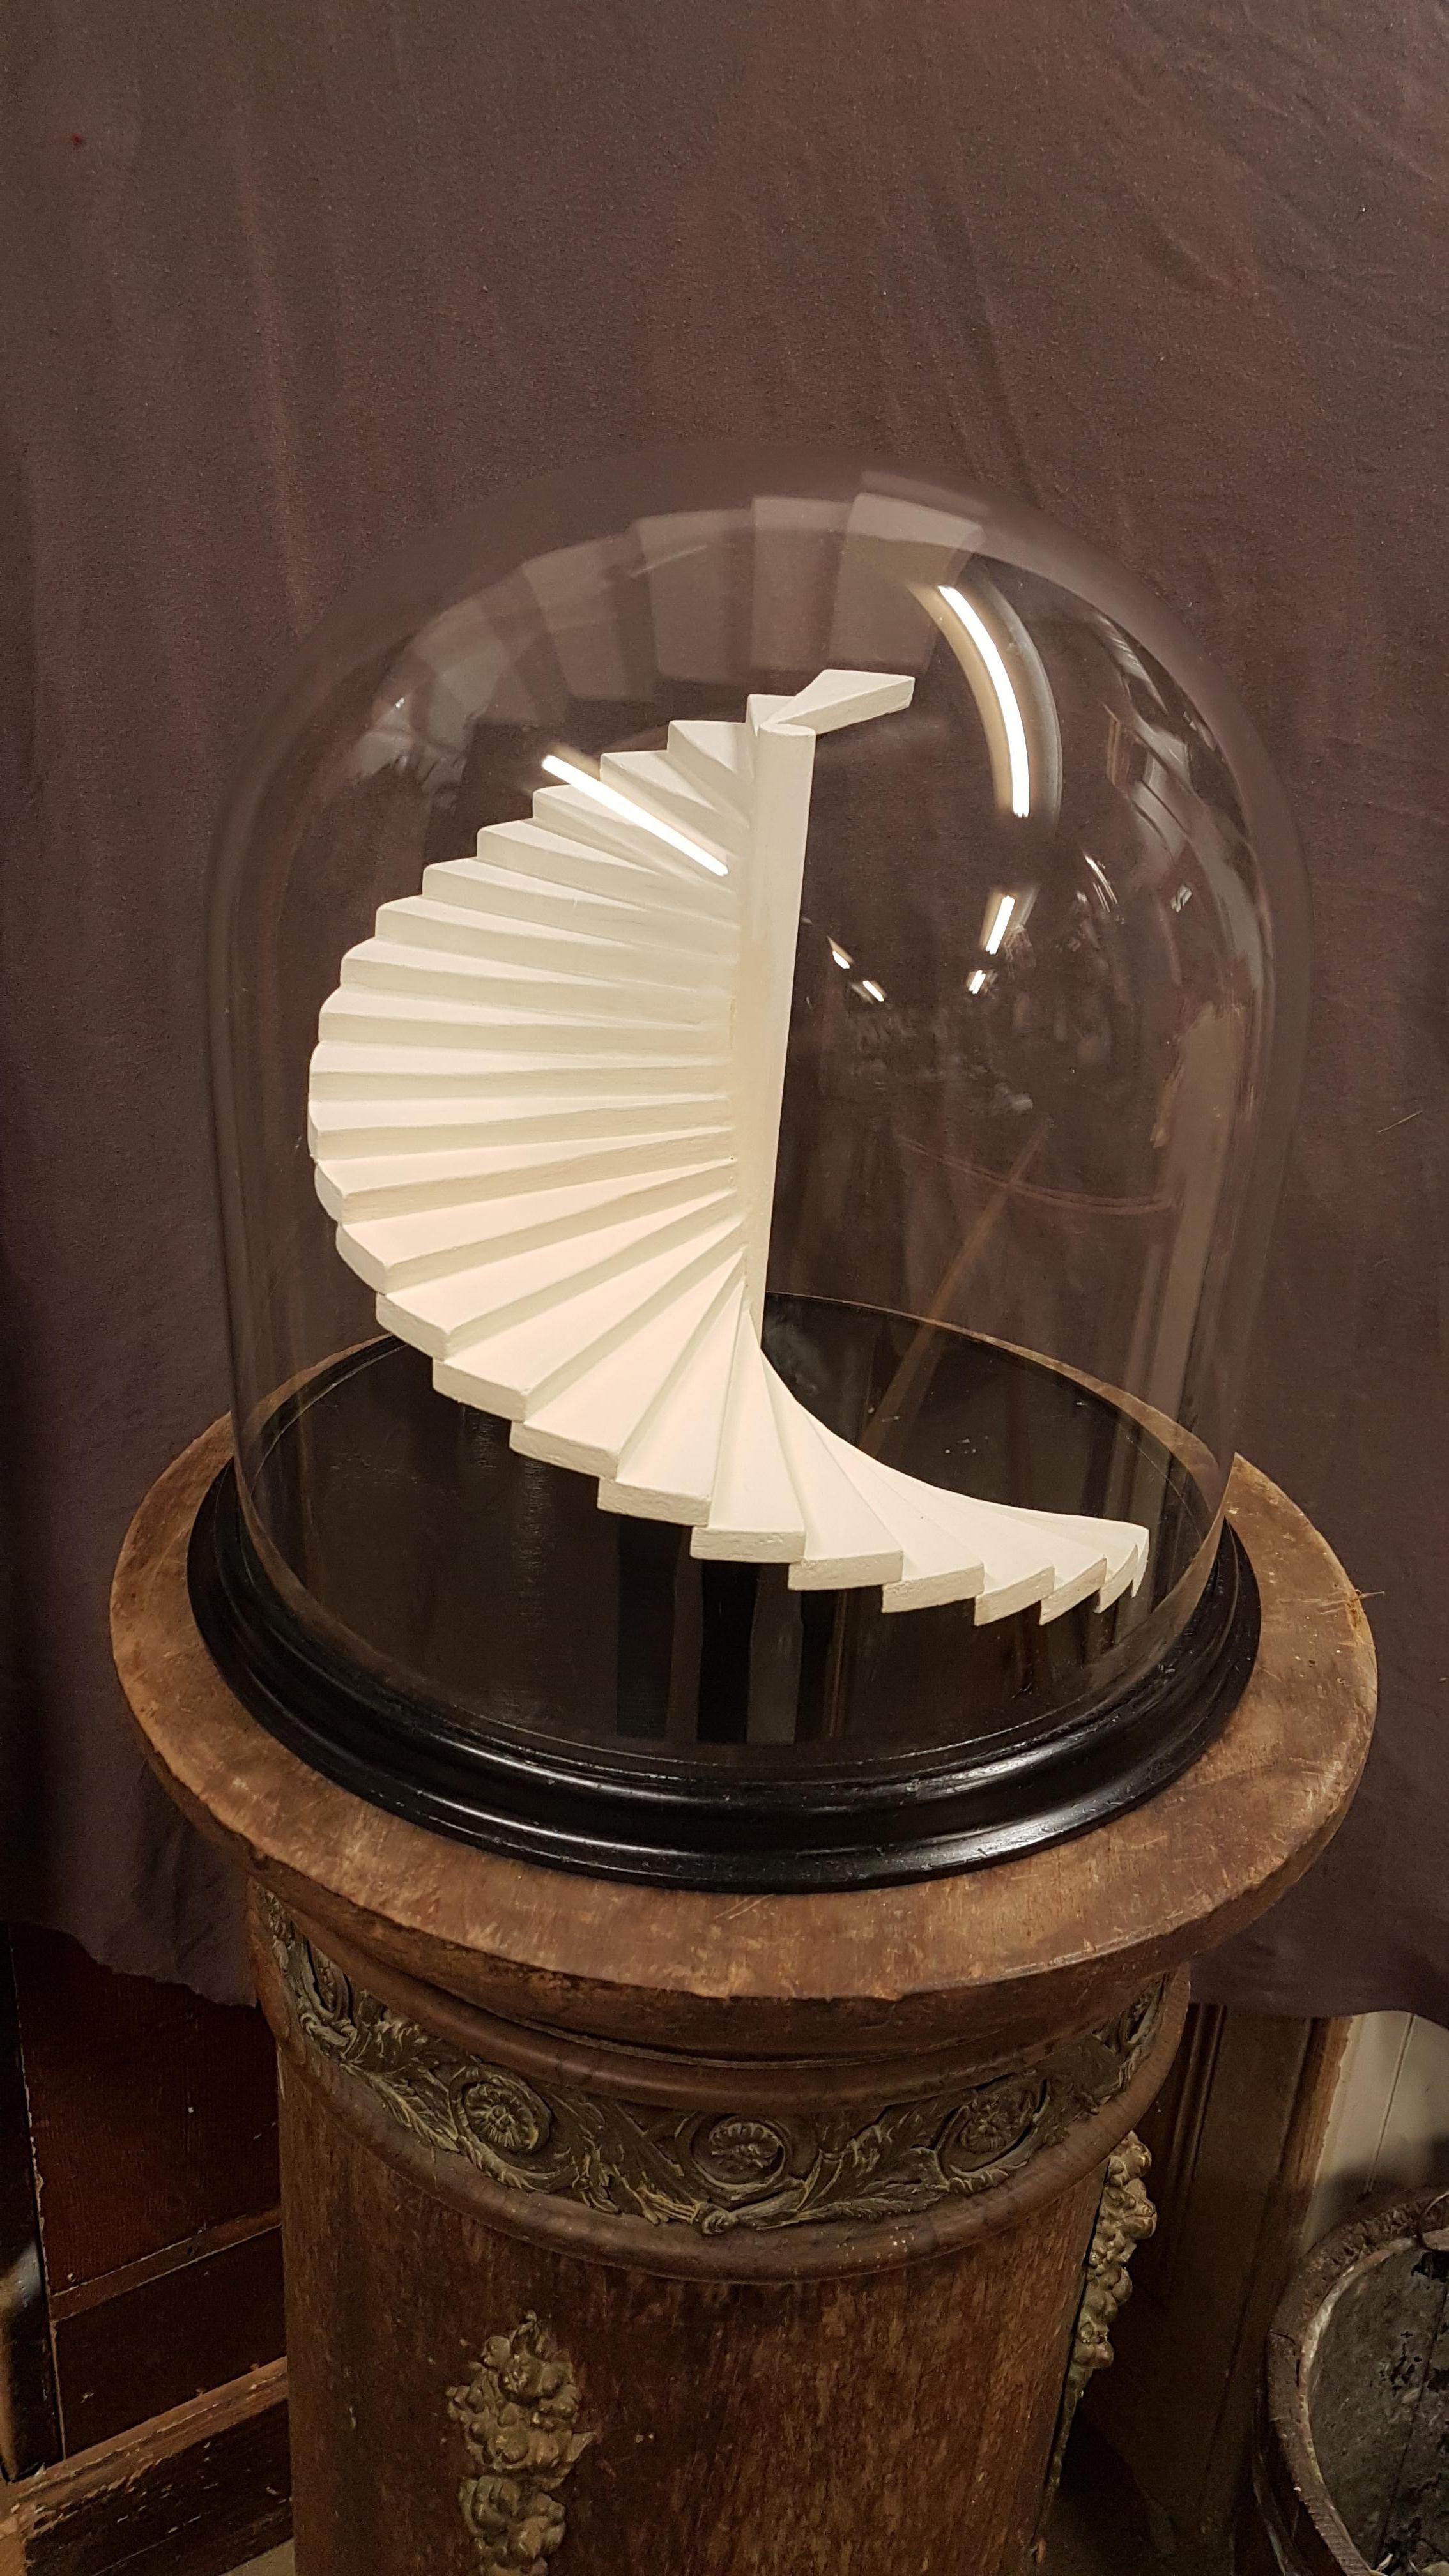 A large scale Victorian glass dome with ebonised base that I designed and built a miniature staircase inside of for display. There are many varieties of miniature architects staircase models around but none of them were what I was after so I